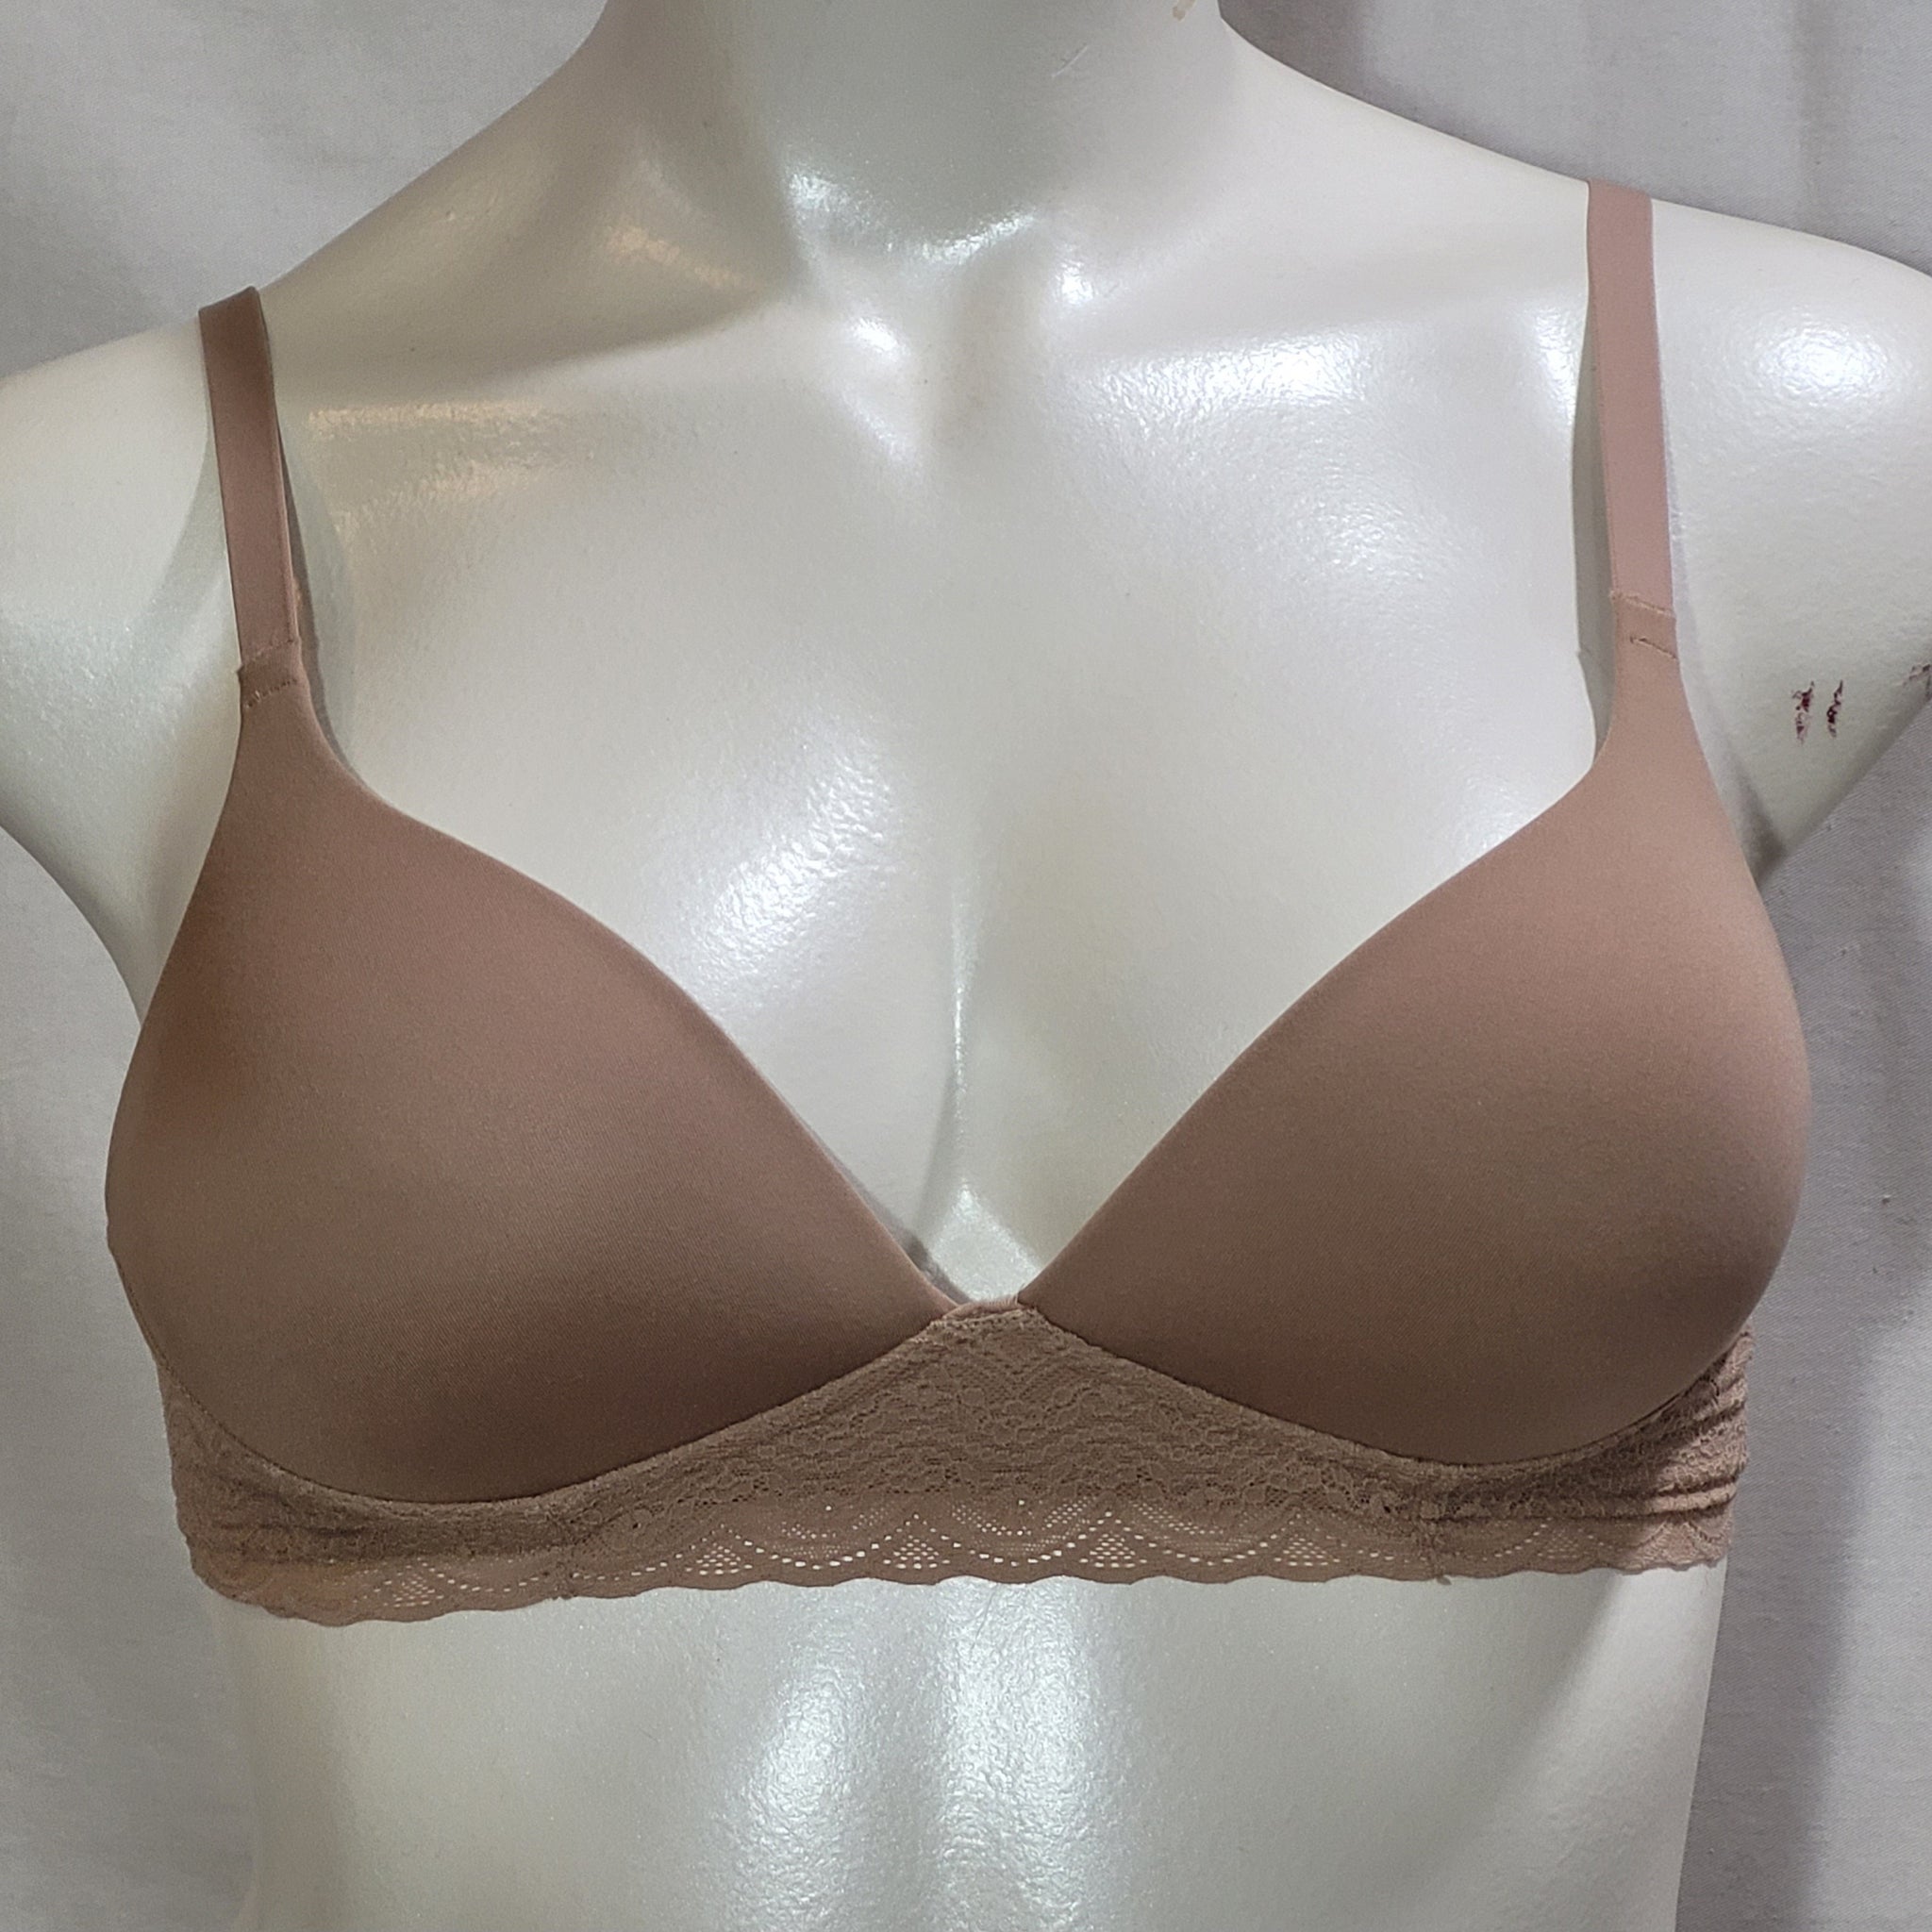 Simply Perfect By Warner's Women's Supersoft Lace Wirefree Bra